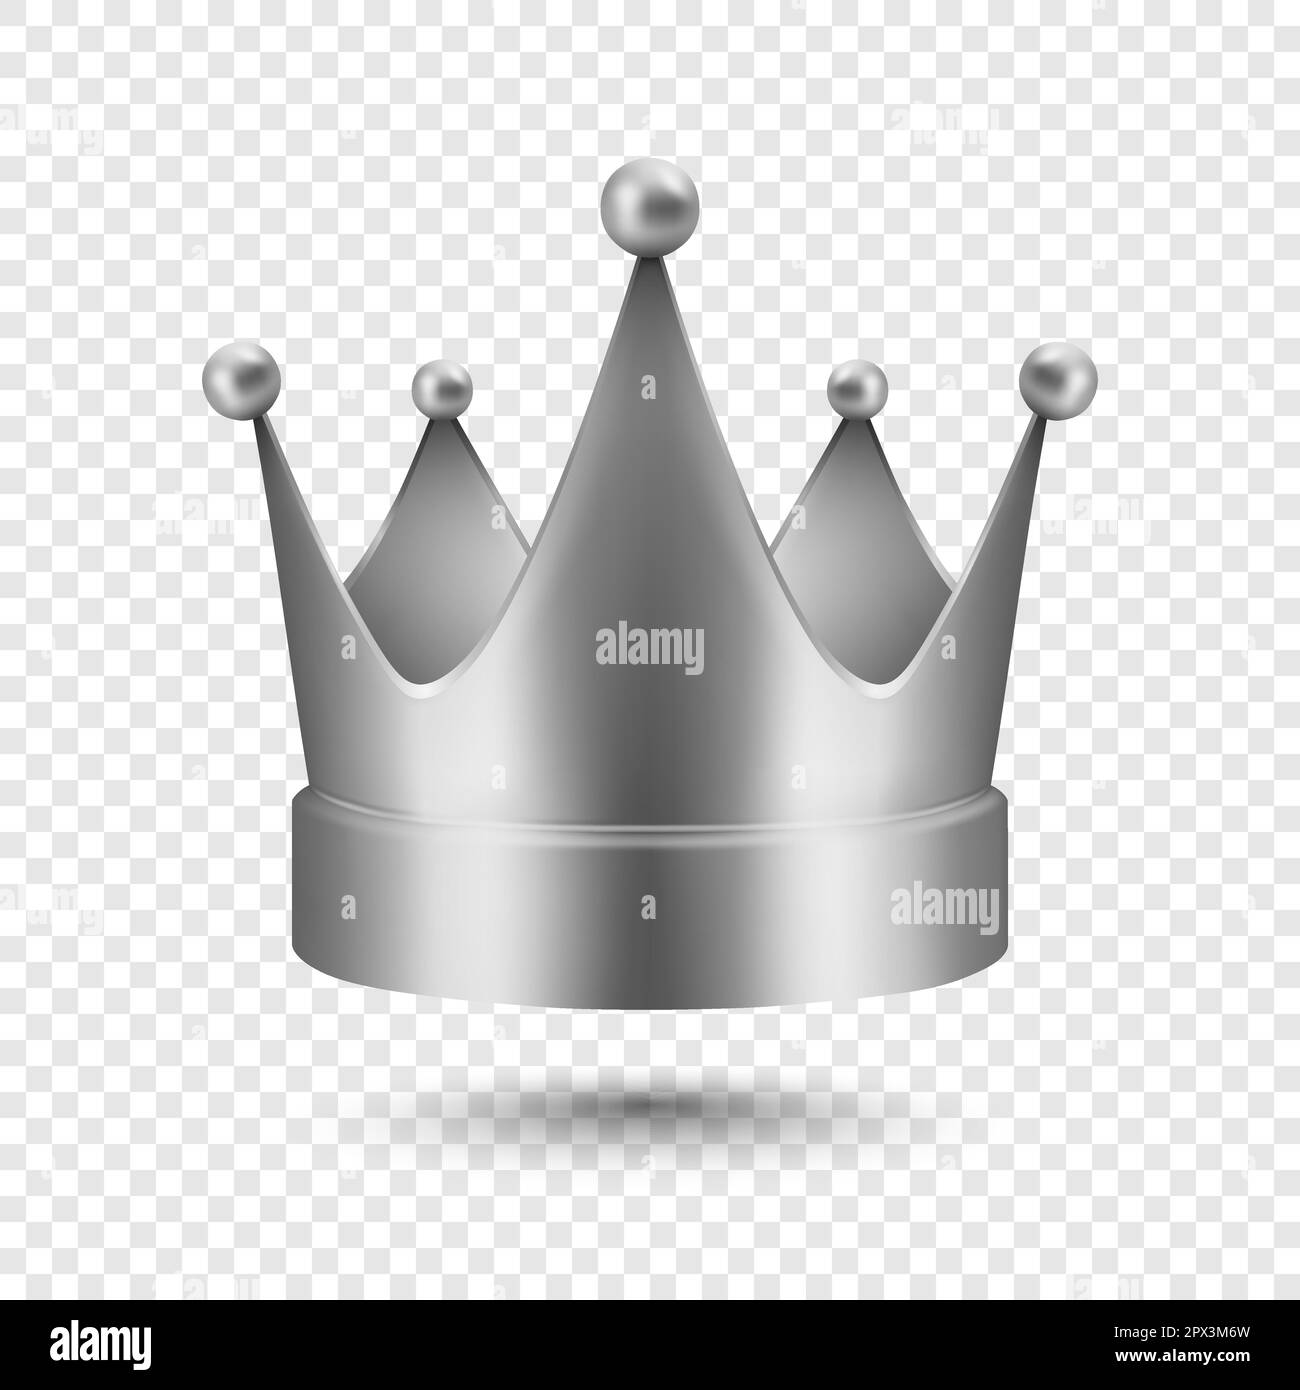 Vector 3d Realistic Silver Crown Icon Closeup Isolated. Yellow Metallic Crown Design Template. Gold Royal King Crown. Symbol of Imperial Power. Luxury Stock Vector